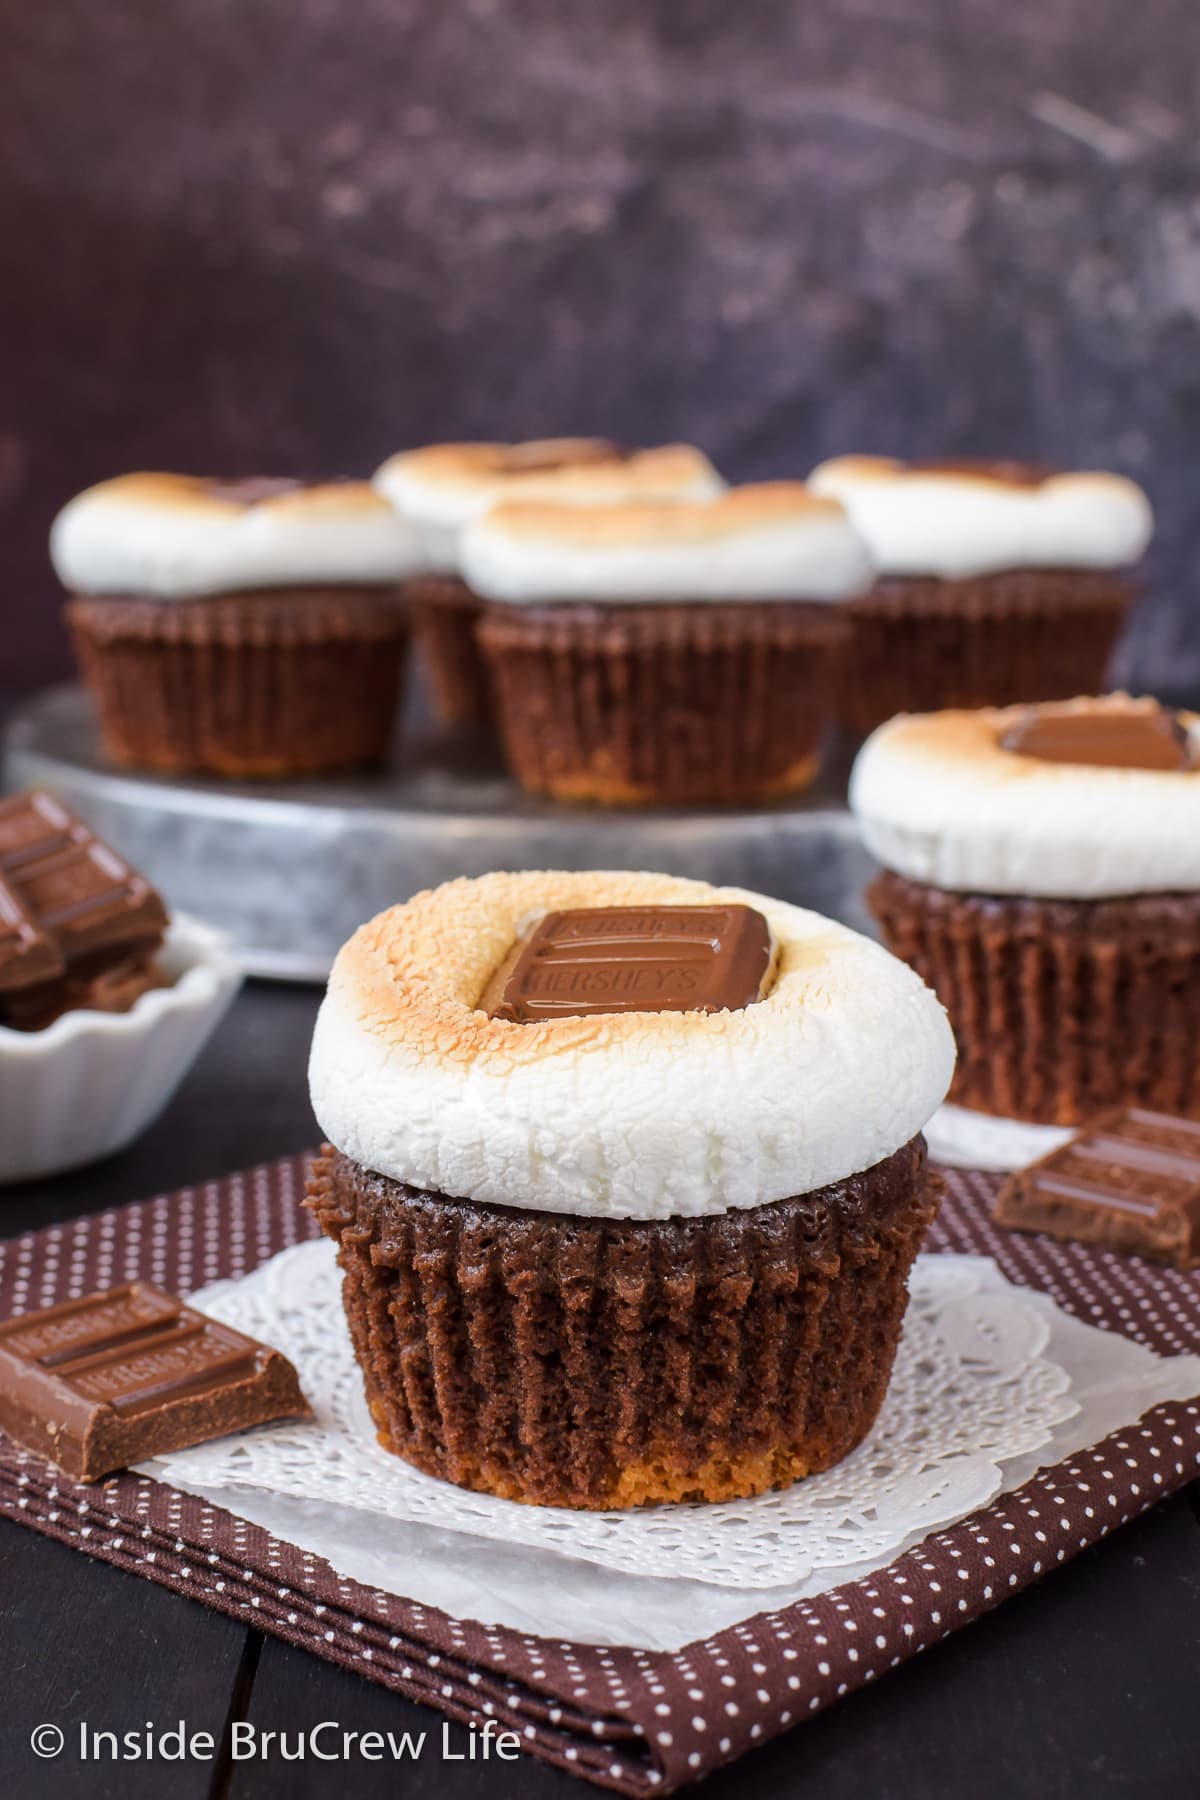 Chocolate brownie cupcakes topped with a toasted marshmallow and chocolate bar.